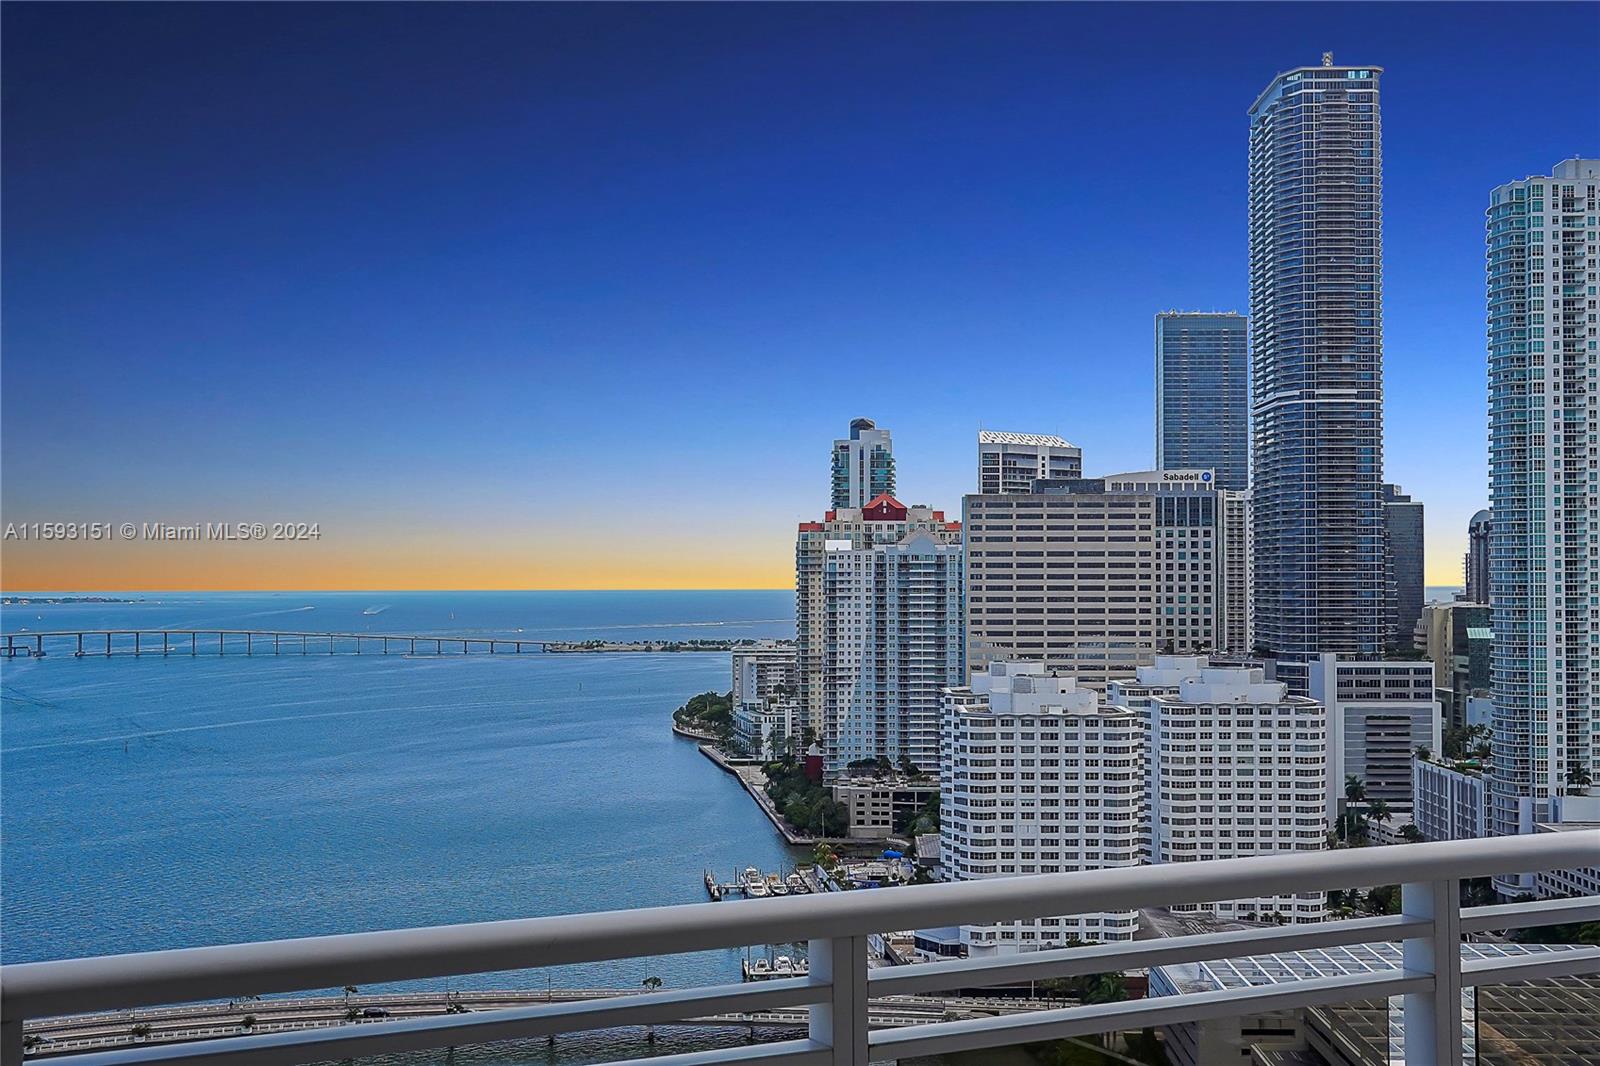 The best and most dramatic line in luxurious Carbonell on exclusive Brickell Key Island. High ceilings. Enjoy island life with 180 degree views from the entire west side of the building which offers open bay and breathtaking city skyline views from this 32nd floor unit. Floor to ceiling windows with 2 balconies on each side. Split floor plan offers privacy for every bedroom. Top amenities including 2 tennis courts, golf putting area, indoor racquetball court, indoor basketball court, heated swimming pool great for lap swimming, jacuzzi, BBQ area, private childs playroom, party room, conference room, computer room, 2 story gym with the latest equipment. Brickell Key offers top amenities with a short bridge leading you from private island life to exciting restaurants and nightlife.